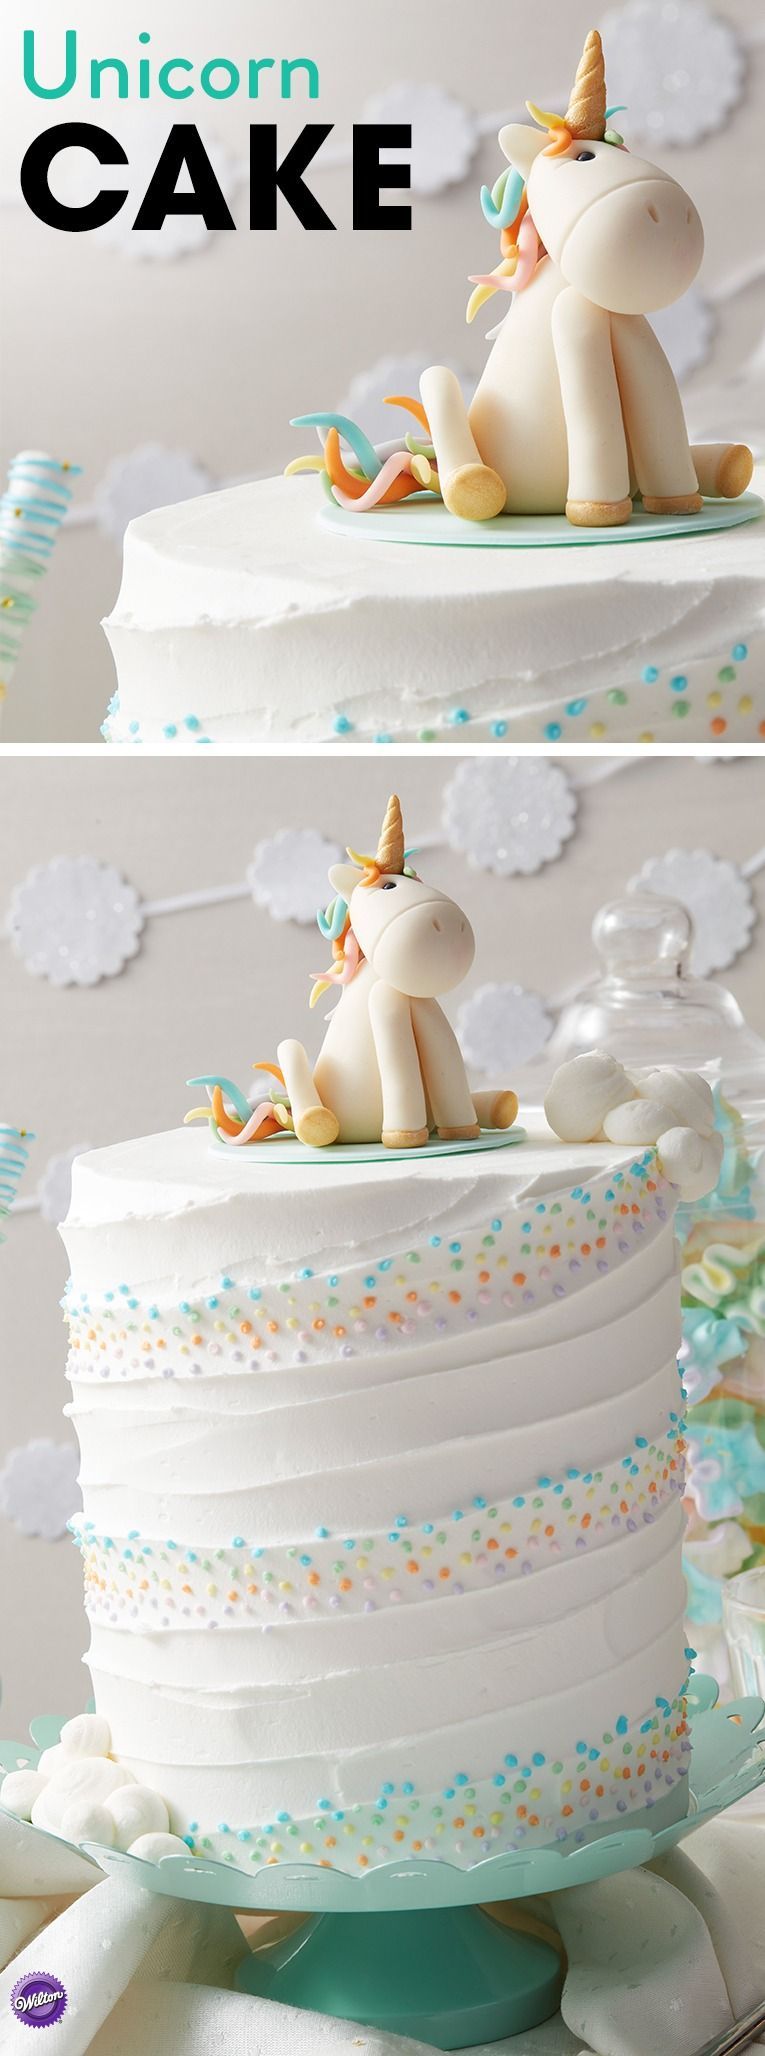 Make all your little one’s wishes come true with this Whimsical Unicorn Cake that is great for birthdays and baby showers. With